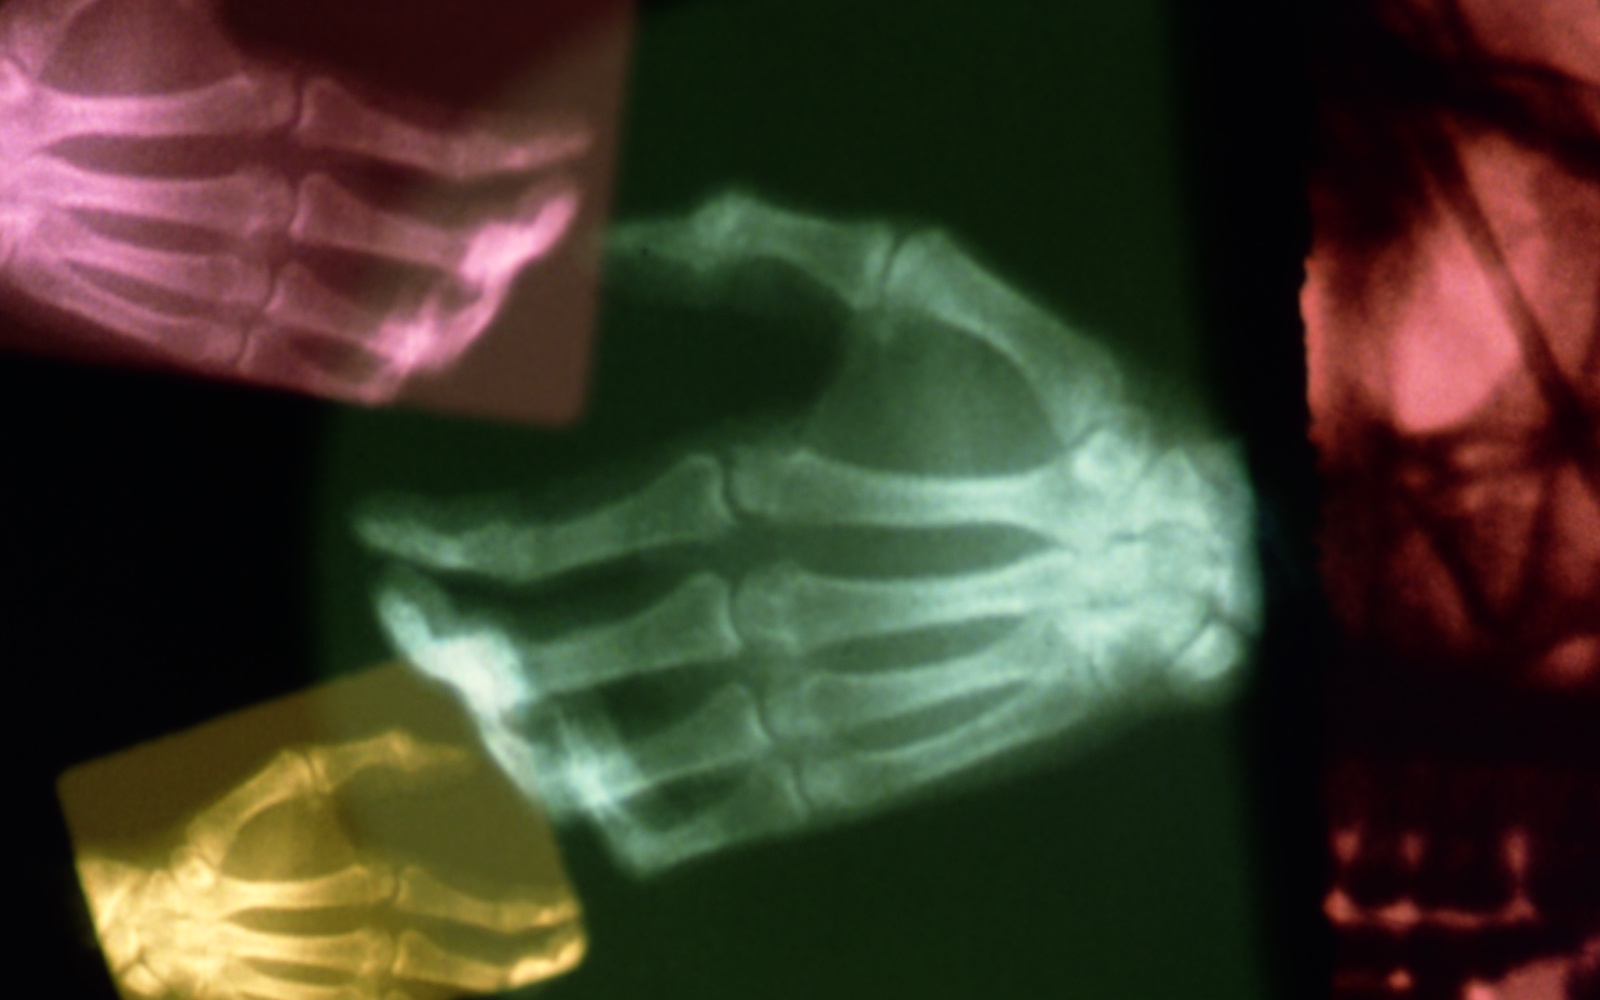 You can see three X-ray images of hands in pink, yellow and green respectively against a black background.